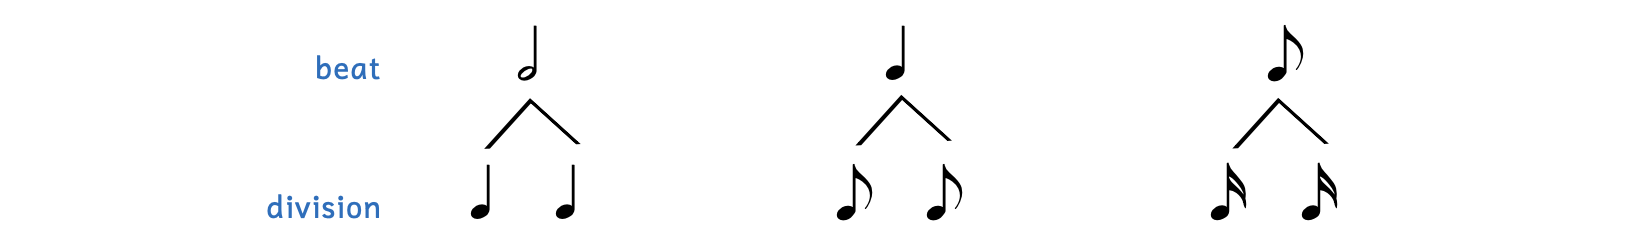 Illustration of beats and their division. A half note beat is divided into two quarter notes. A quarter note beat is divided into two eighth notes. An eighth note beat is divided into two sixteenth notes.